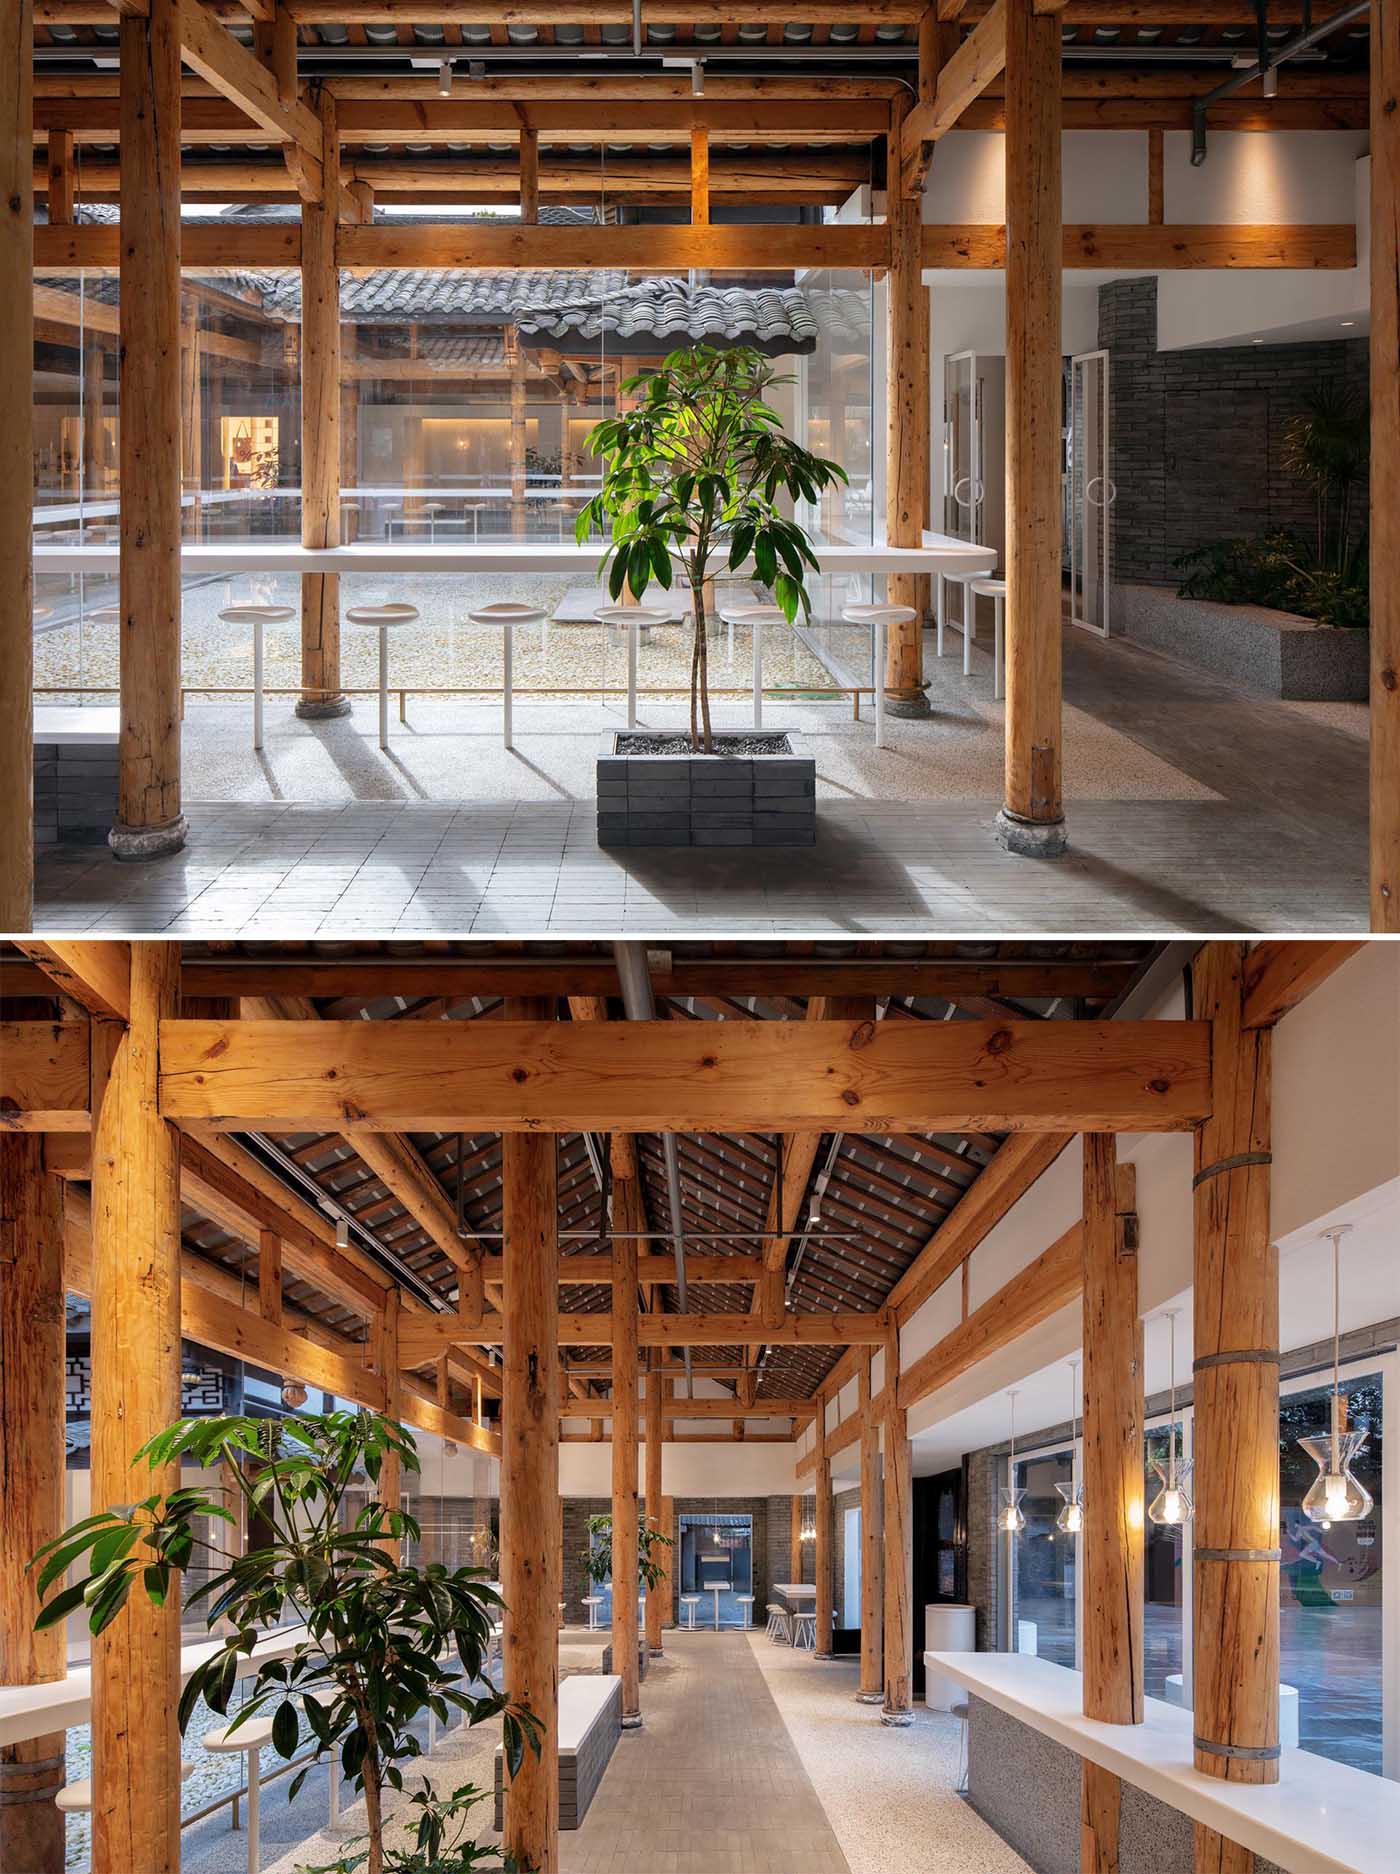 The structural wood elements and plants add a touch of nature to the light-filled interior.